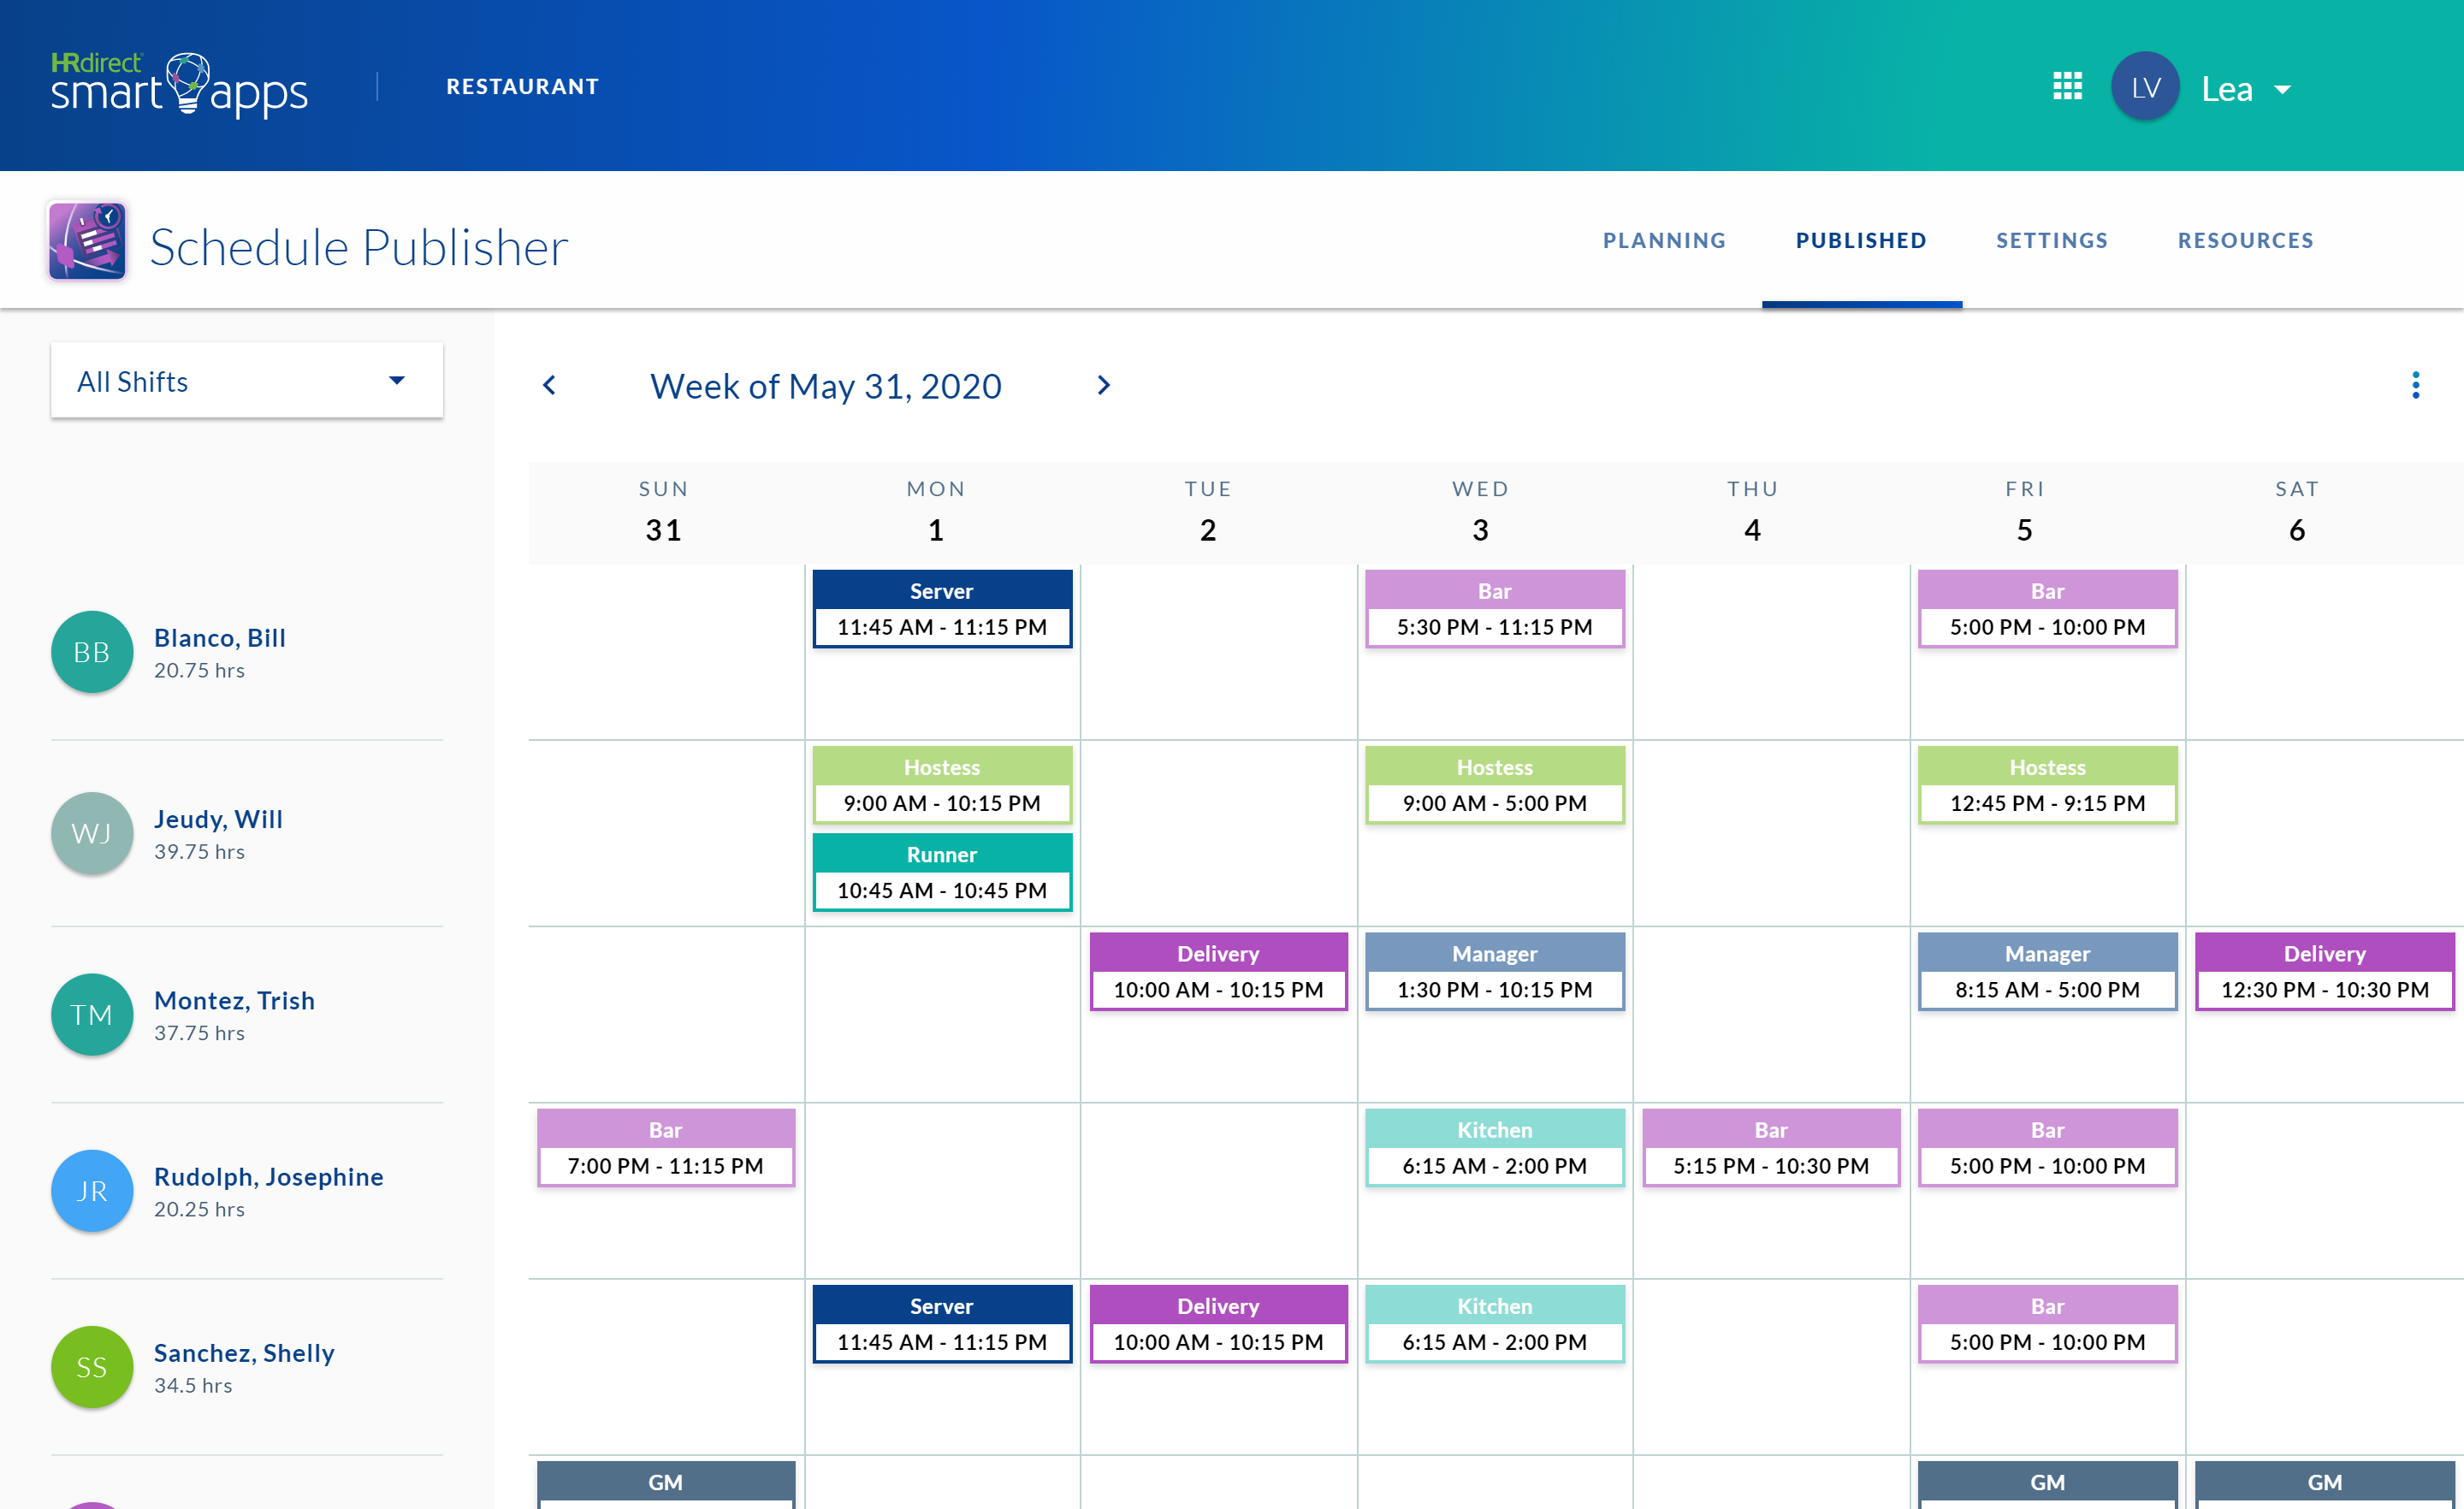 schedule publisher app's published page showing scheduled employees and their schedule for that week in a calendar format